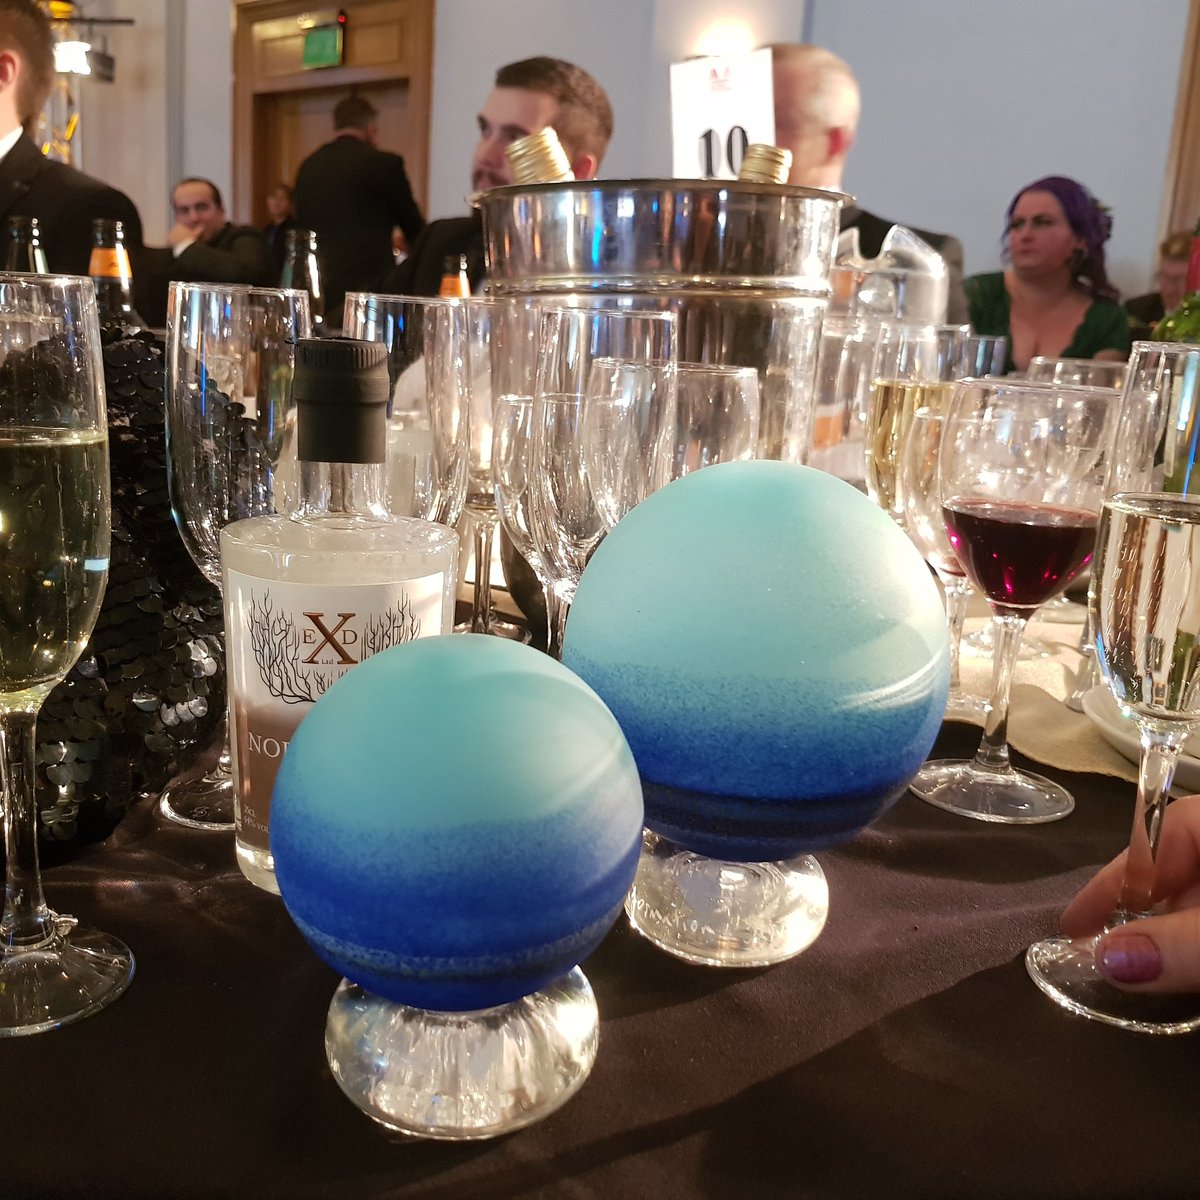 Gold in Visitor Information Service of the Year and Silver in Tourism Innovation Award. Wow. Thank you #BBSTourismAwards we are humbled and proud to represent the South West in this way #southwestisbest #BBSTourismAwards